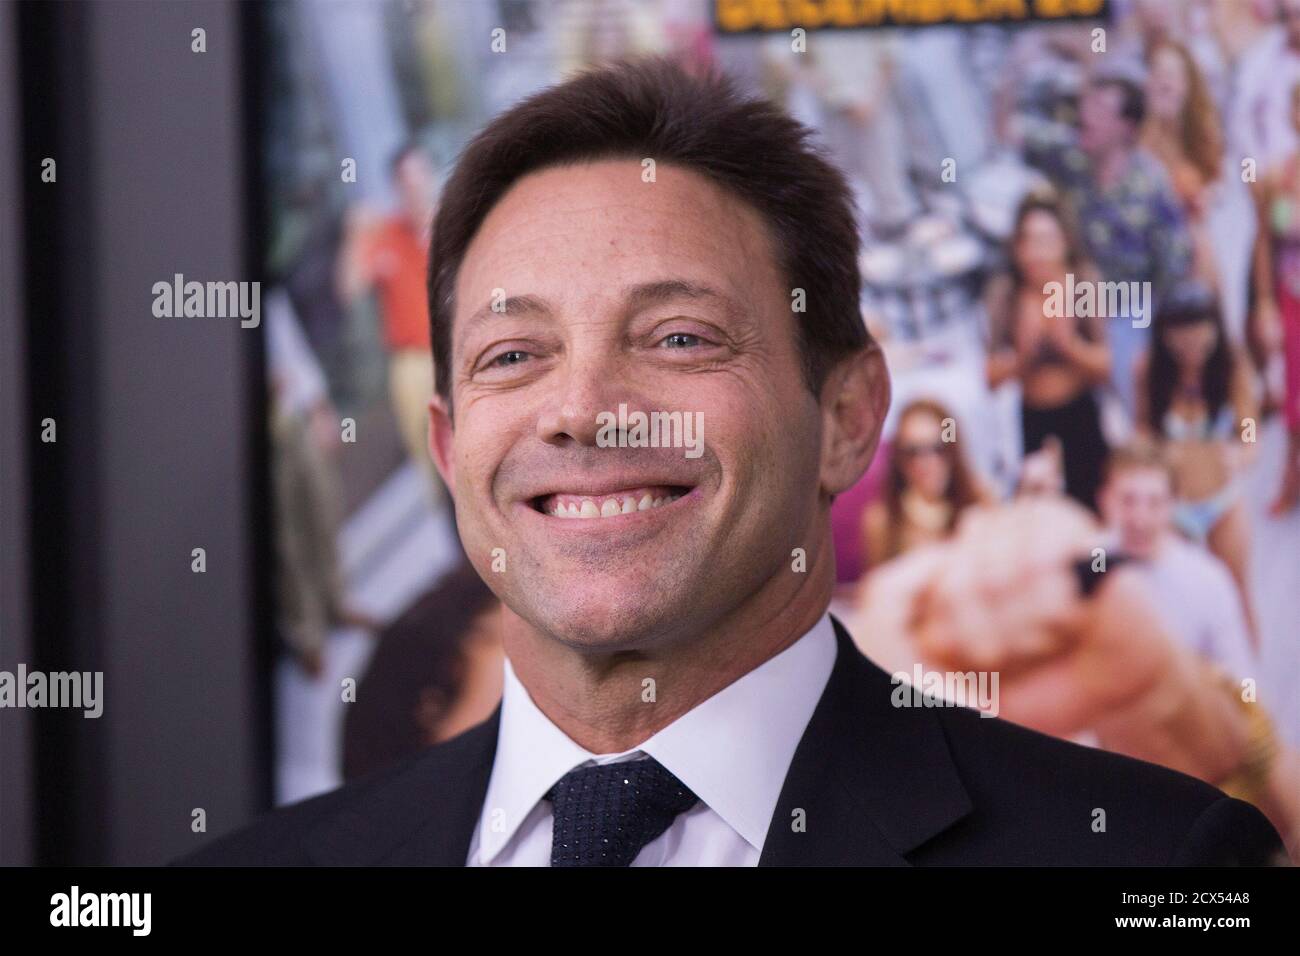 Jordan Belfort High Resolution Stock Photography and Images - Alamy